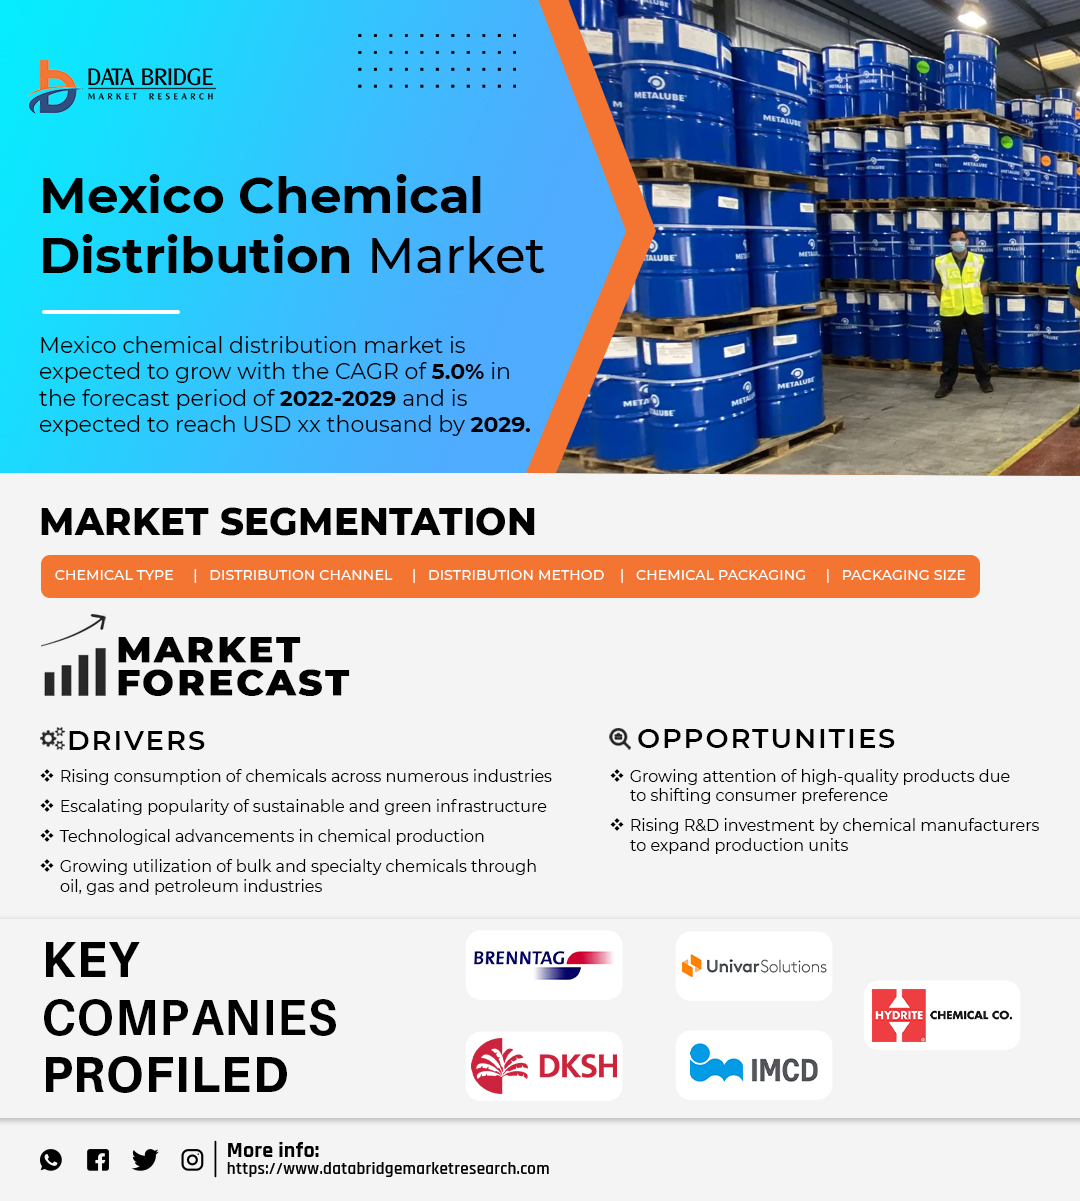 Mexico Chemical Distribution Market